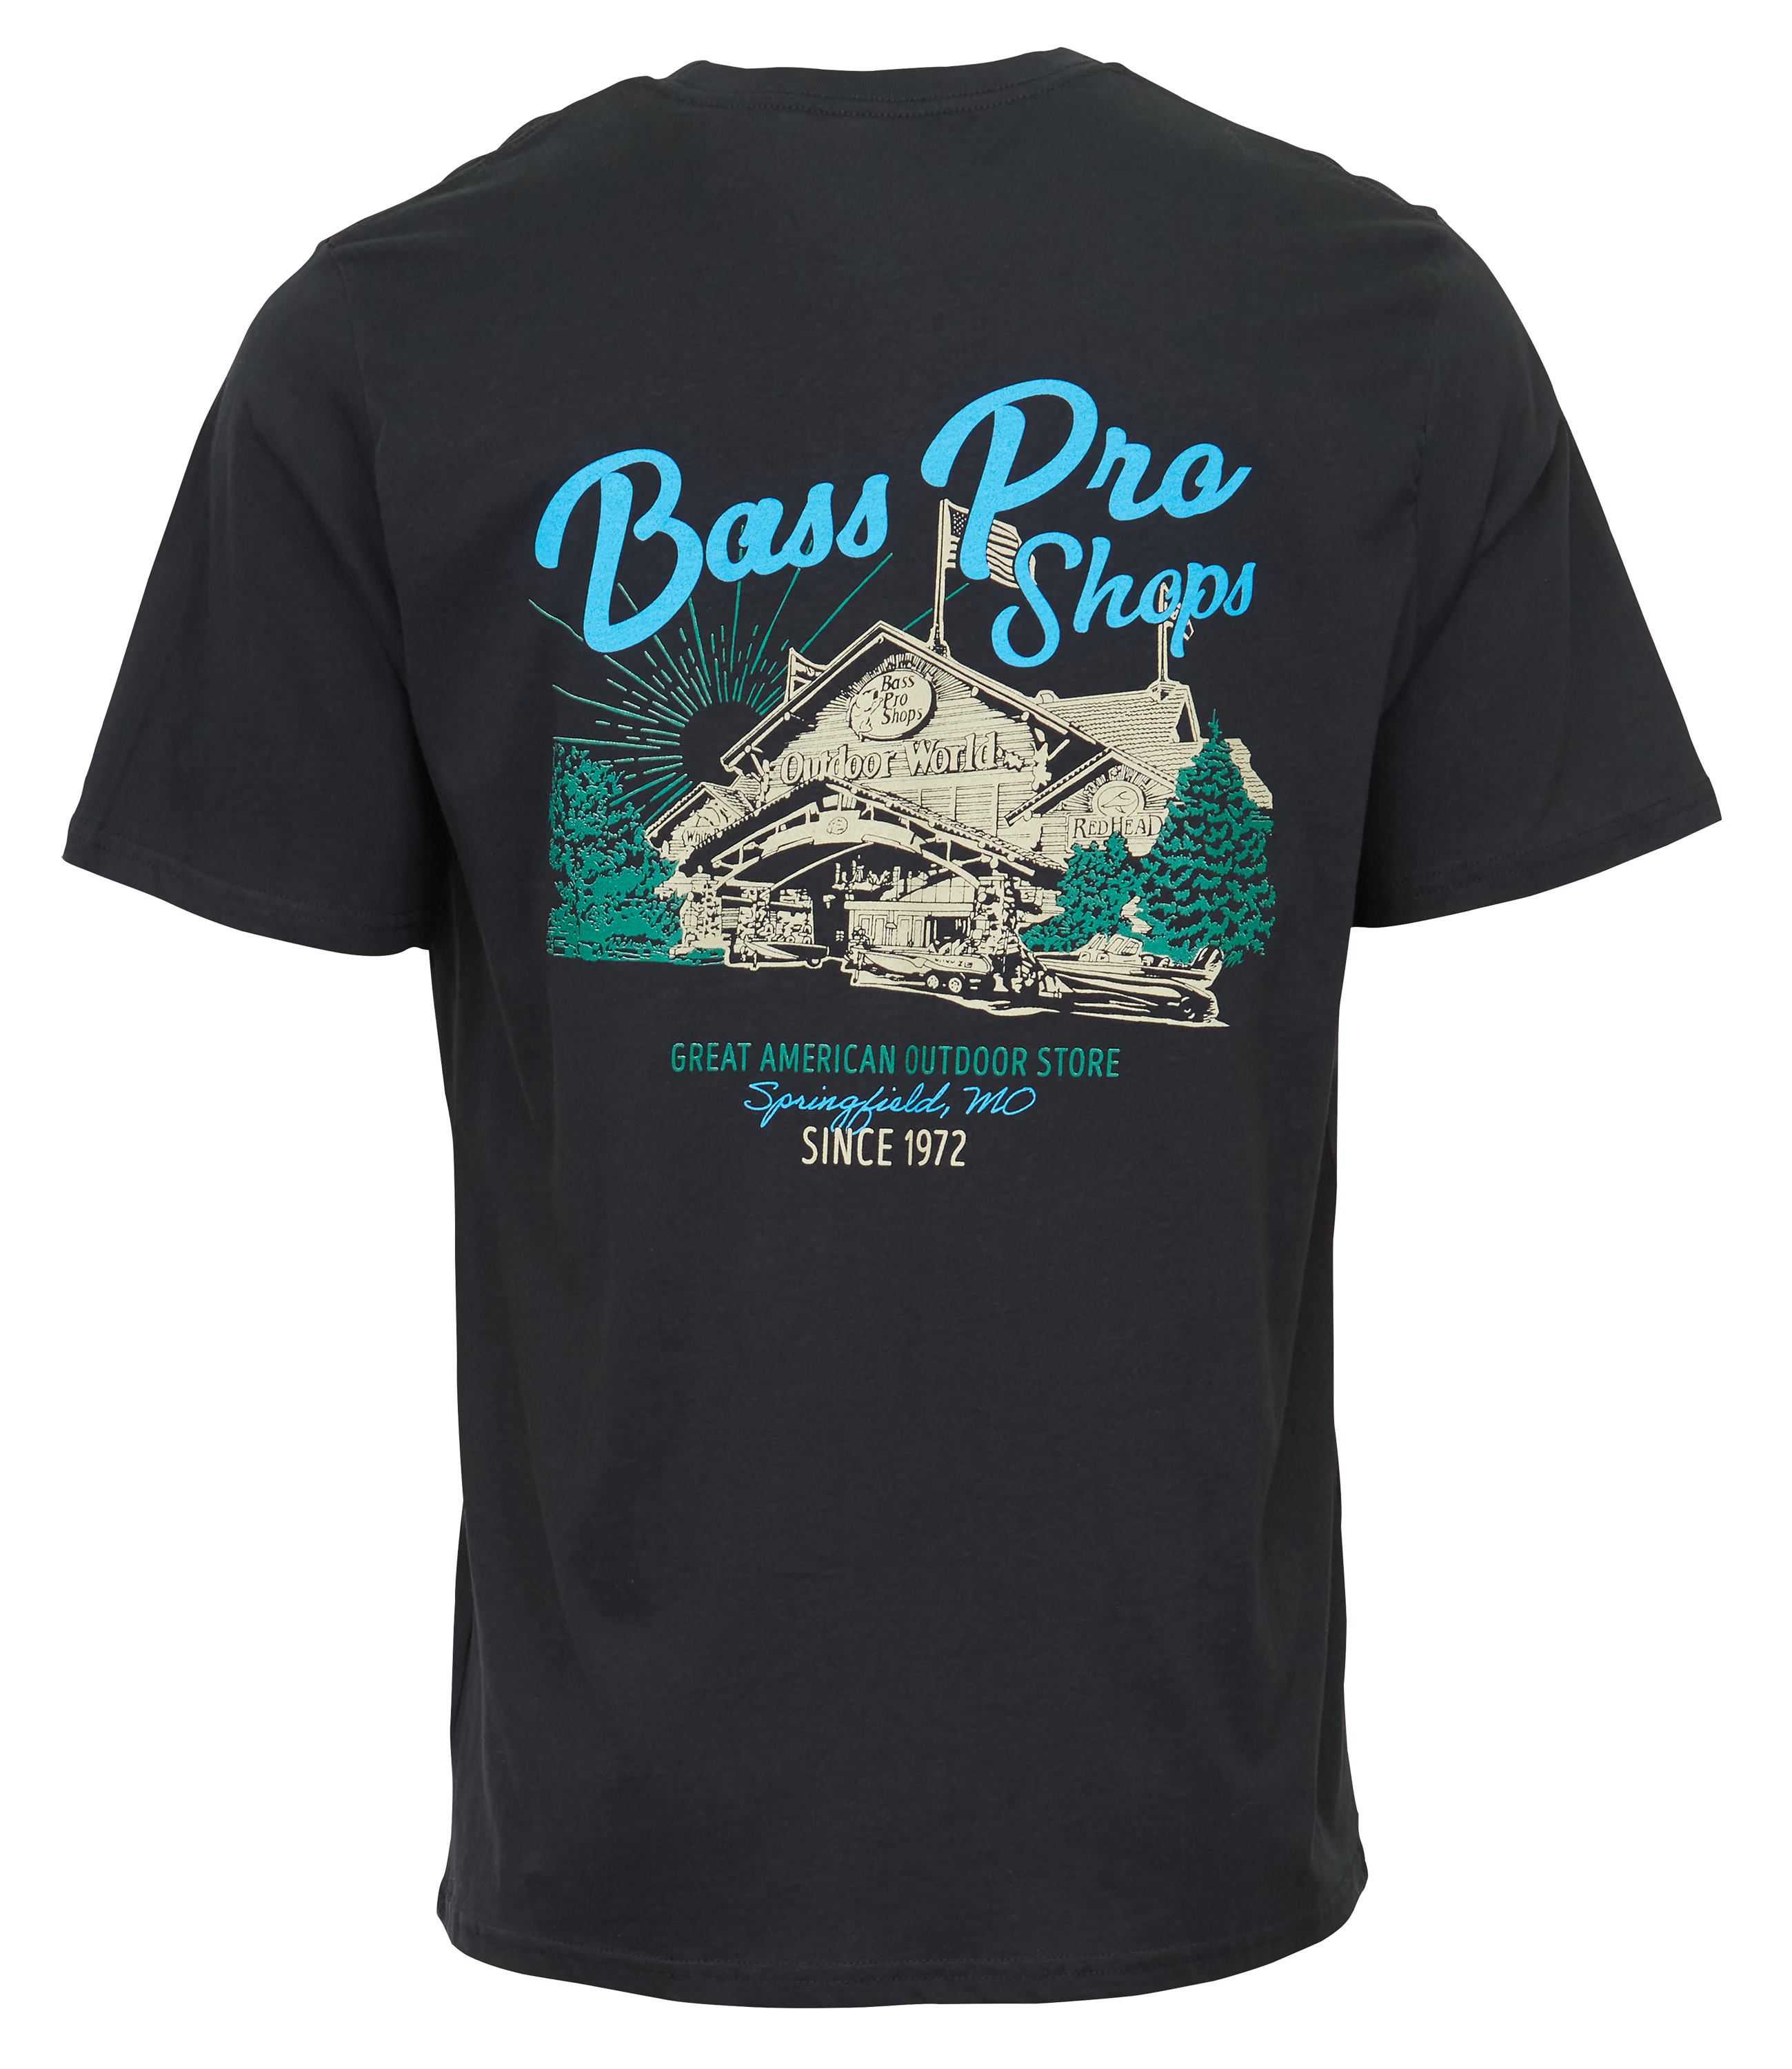 Bass Pro Shops Woodcut Short-Sleeve T-Shirt for Toddlers or Kids